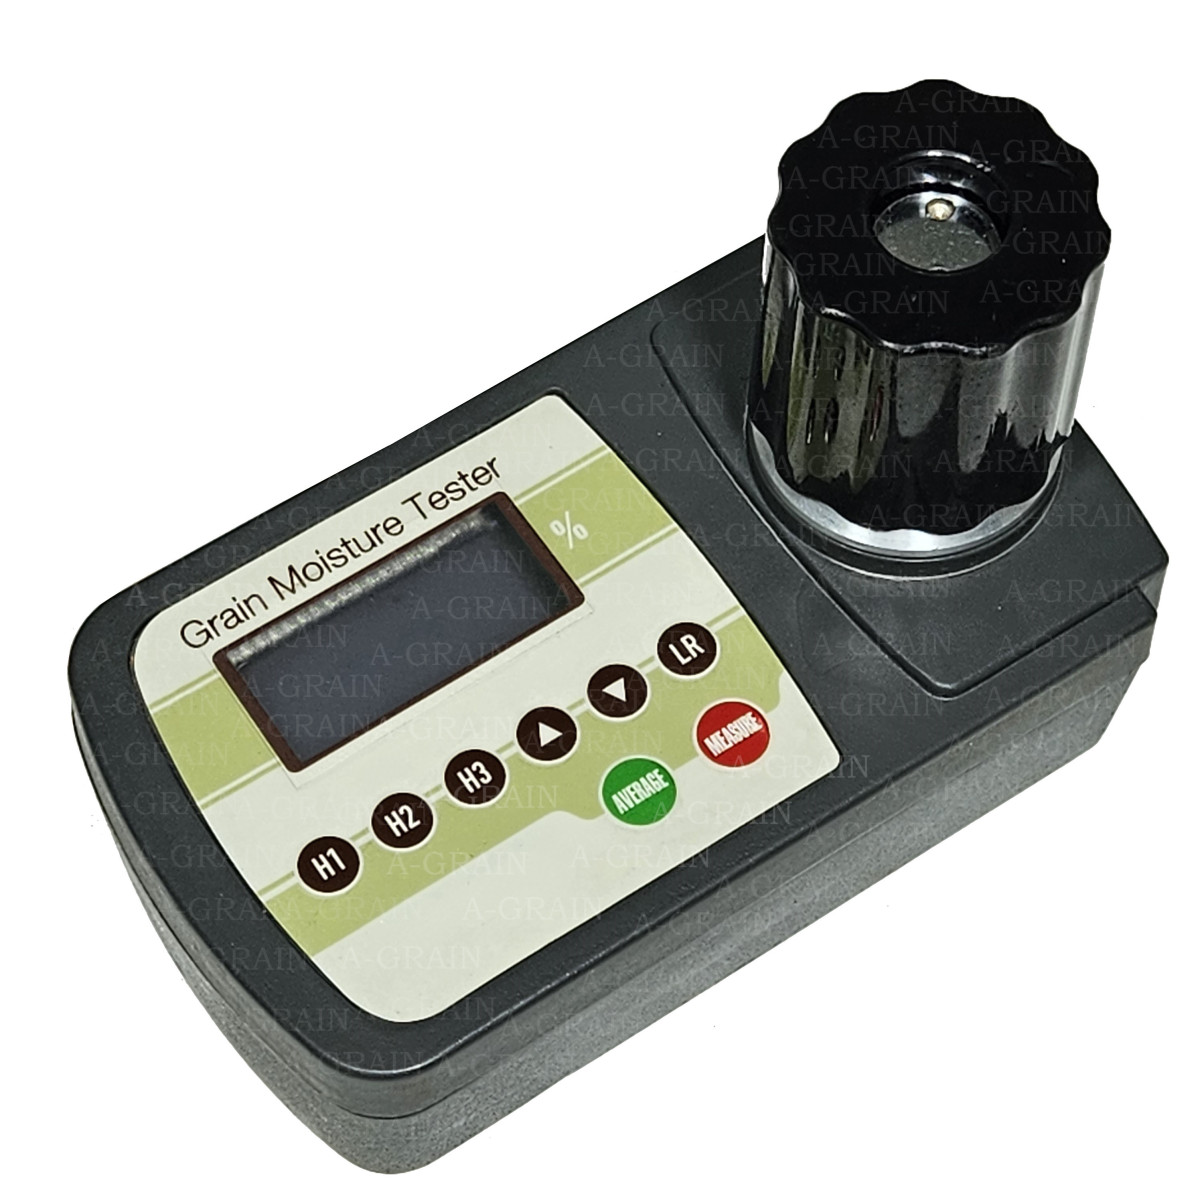 An image displaying a Portable Digital Grain Moisture Meter (AG-12), showcasing its compact size and handheld design for easy use in various settings. The meter features a digital display and control buttons, indicating its user-friendly interface and portability.